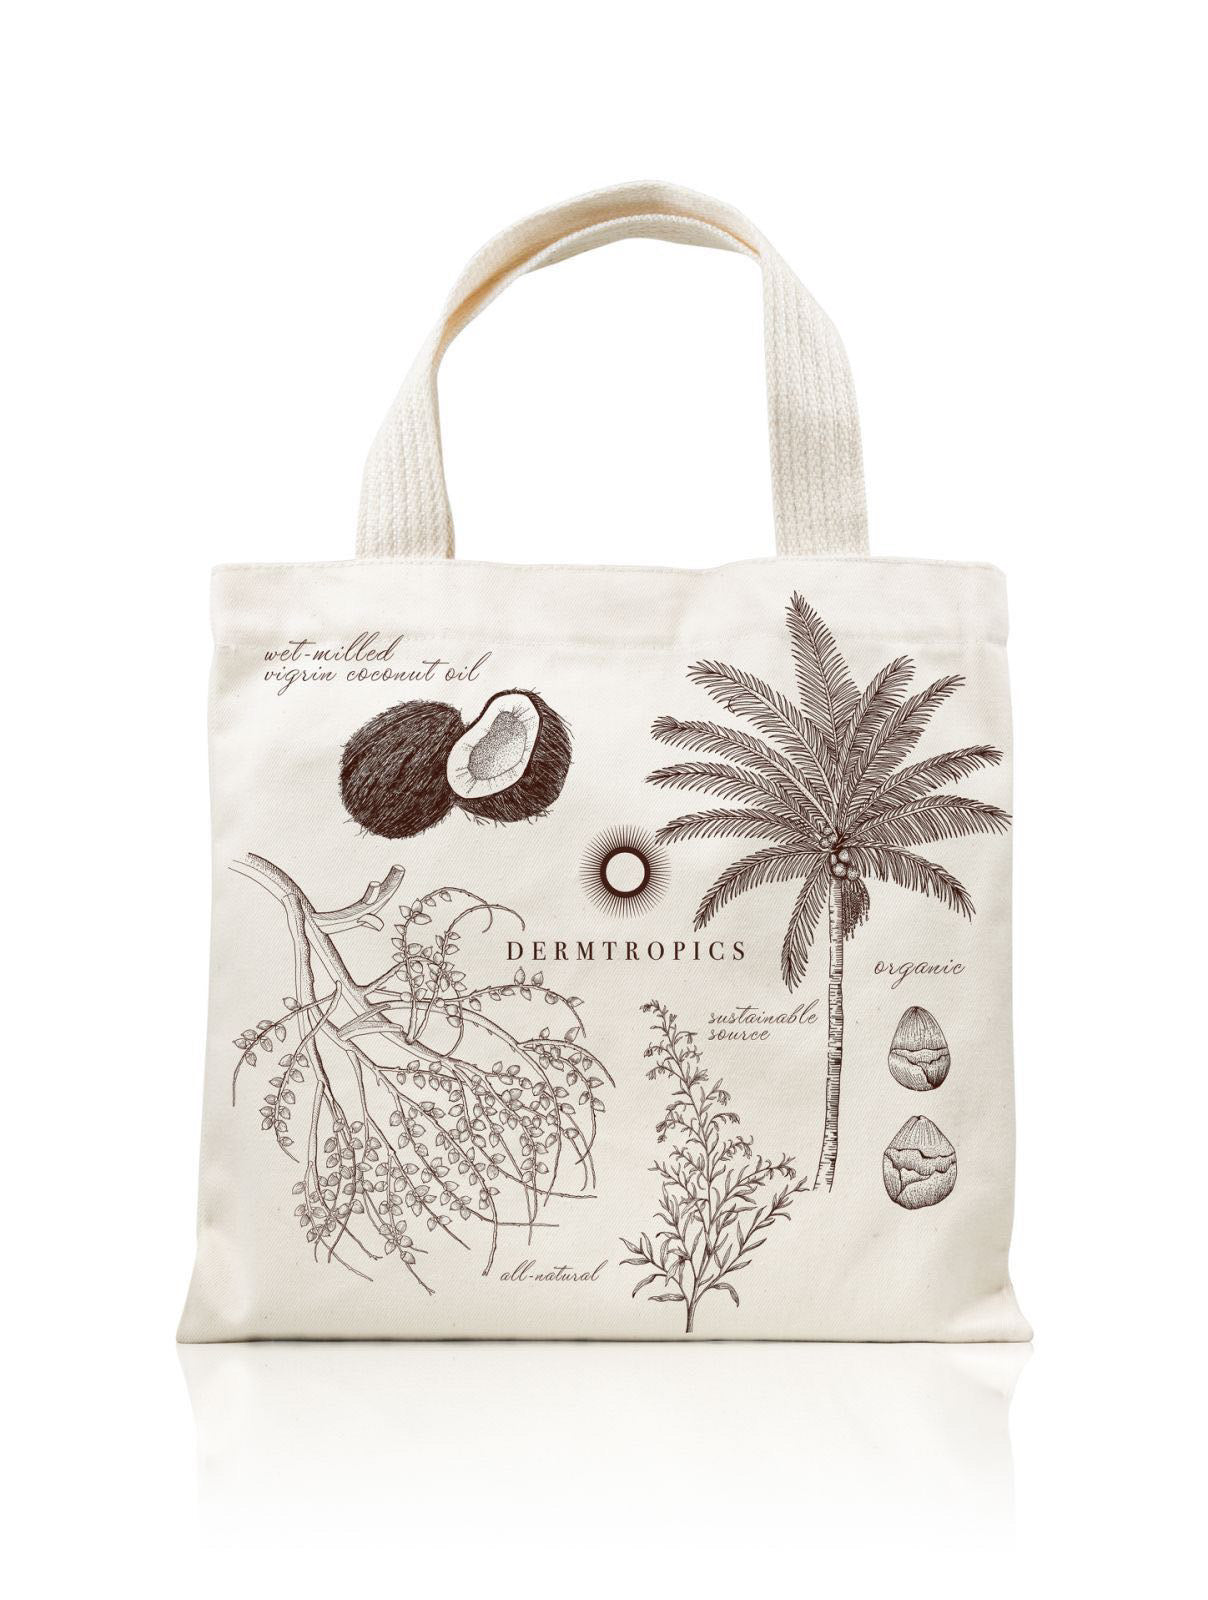 Anniversary Limited Edition Tote Bag by Mobudays